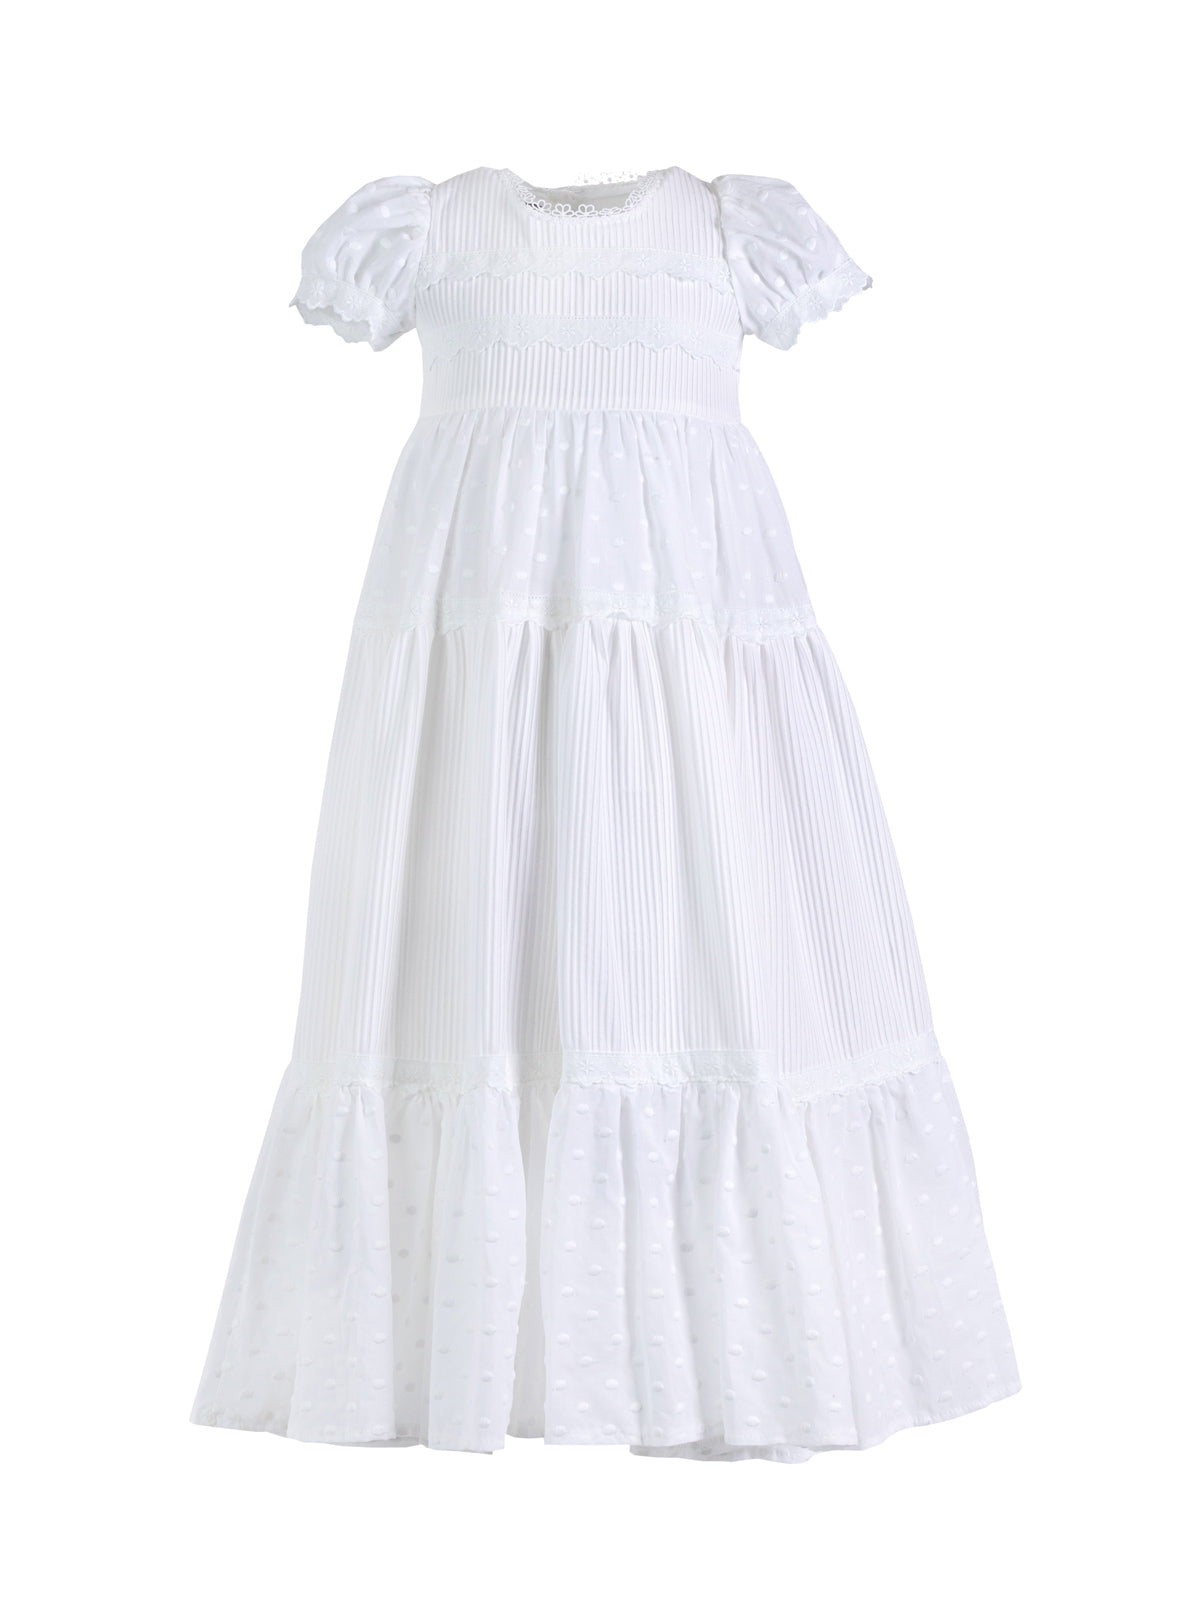 Long Christening Gown for newborn - PEACE